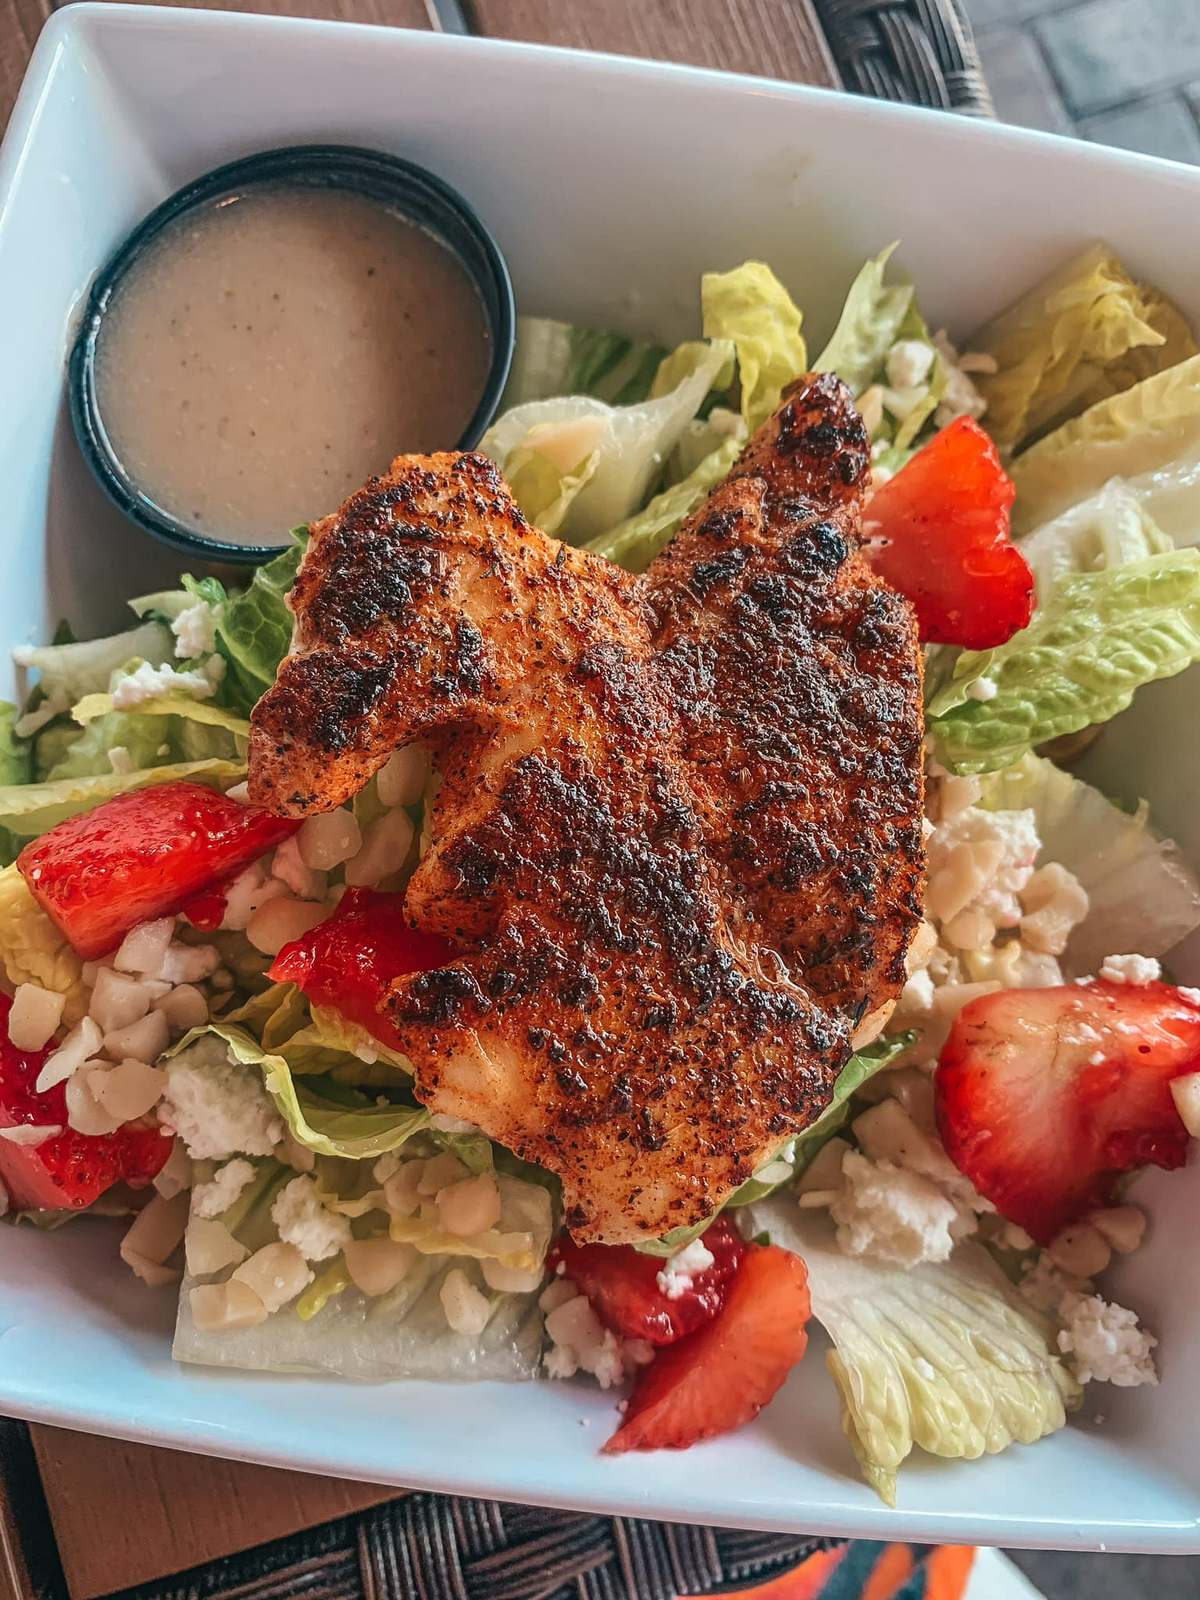 Grouper salad from Salty's restaurant Clearwater Beach